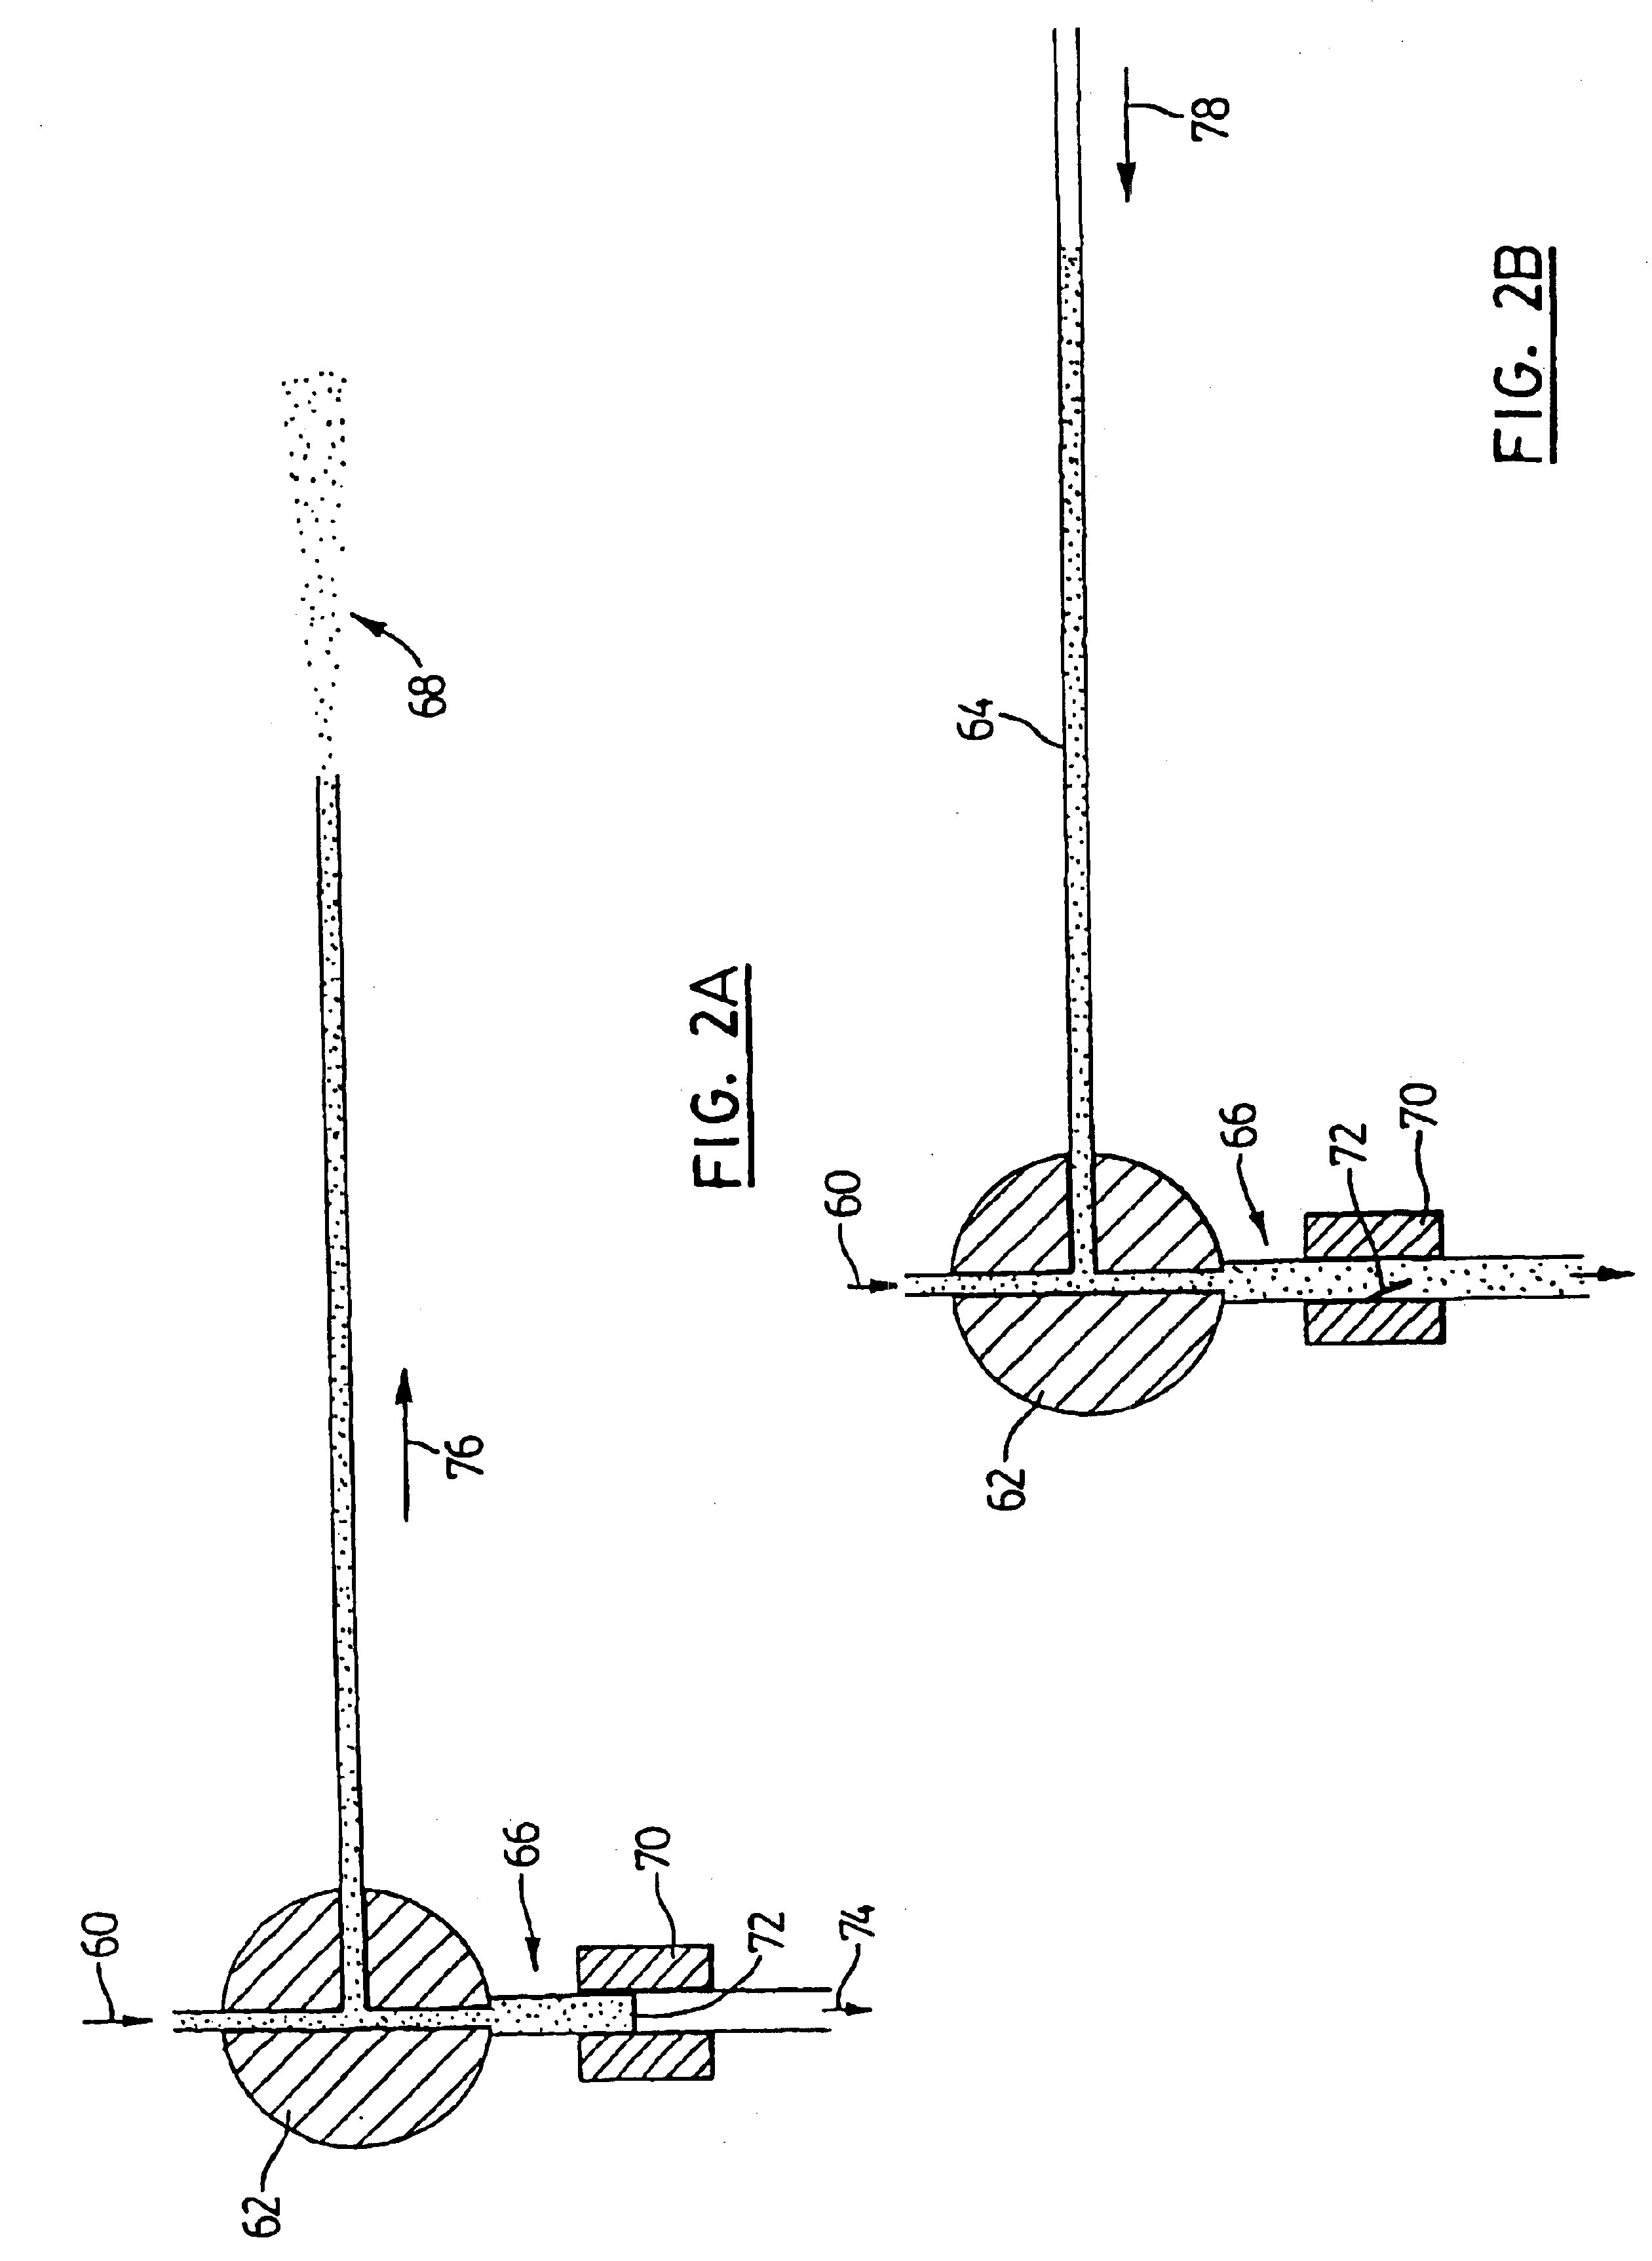 Sample introduction device for mass spectrometry using a fast fluidic system to synchronize multiple parallel liquid sample streams